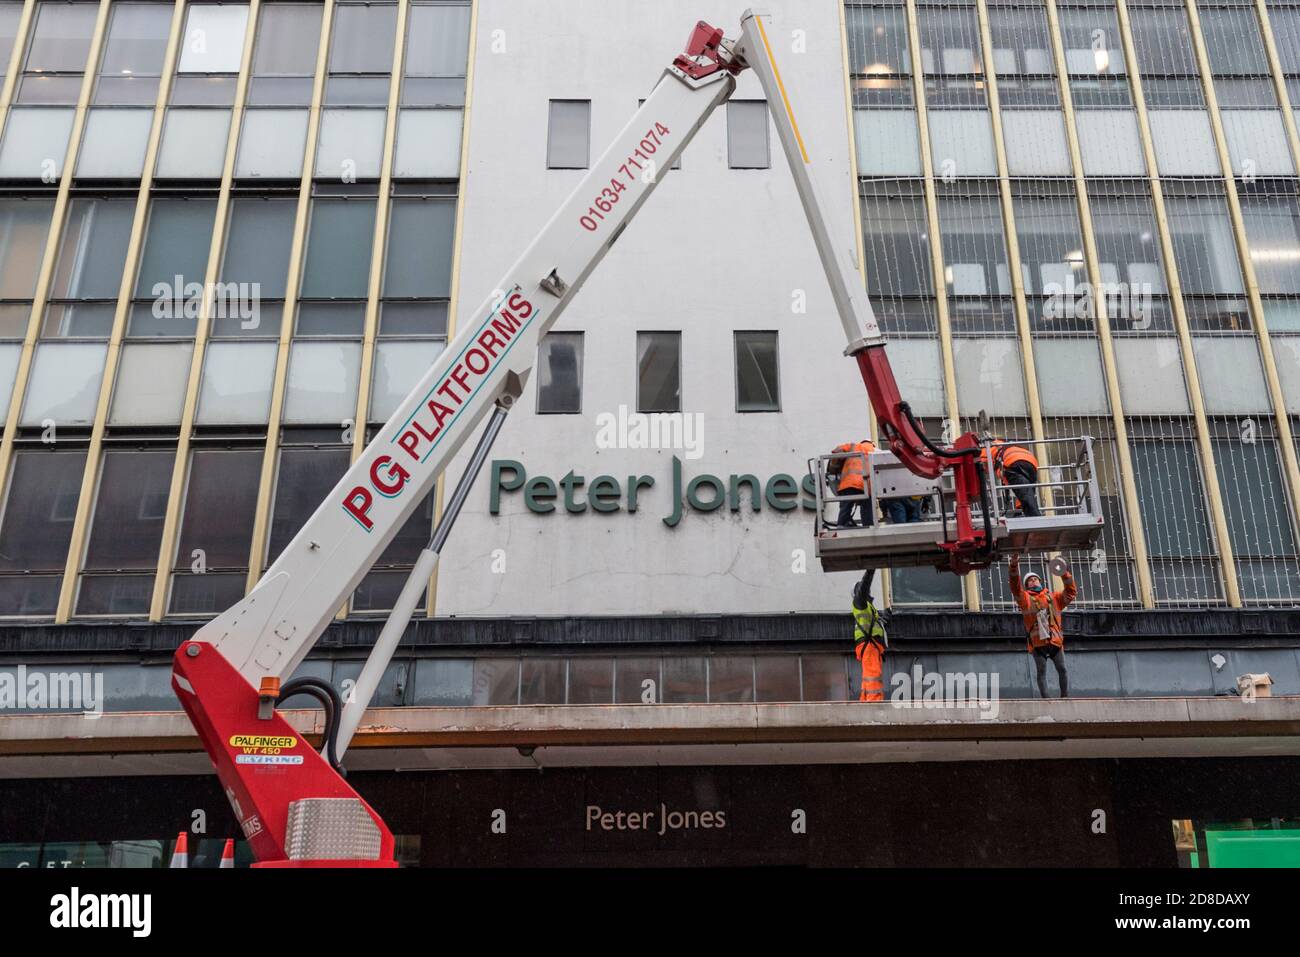 London, UK.  29 October 2020.  Workmen install Christmas lights to the exterior of Peter Jones department store in Sloane Square.  The store is part of the John Lewis group whose flagship store in Oxford Street has been granted permission to turn half of the building into offices as the company undergoes a restructuring plan to stem a downturn in business performance suffered during the ongoing coronavirus pandemic. In addition, staff will not be paid their annual bonus for the first time since 1953.  Credit: Stephen Chung / Alamy Live News Stock Photo